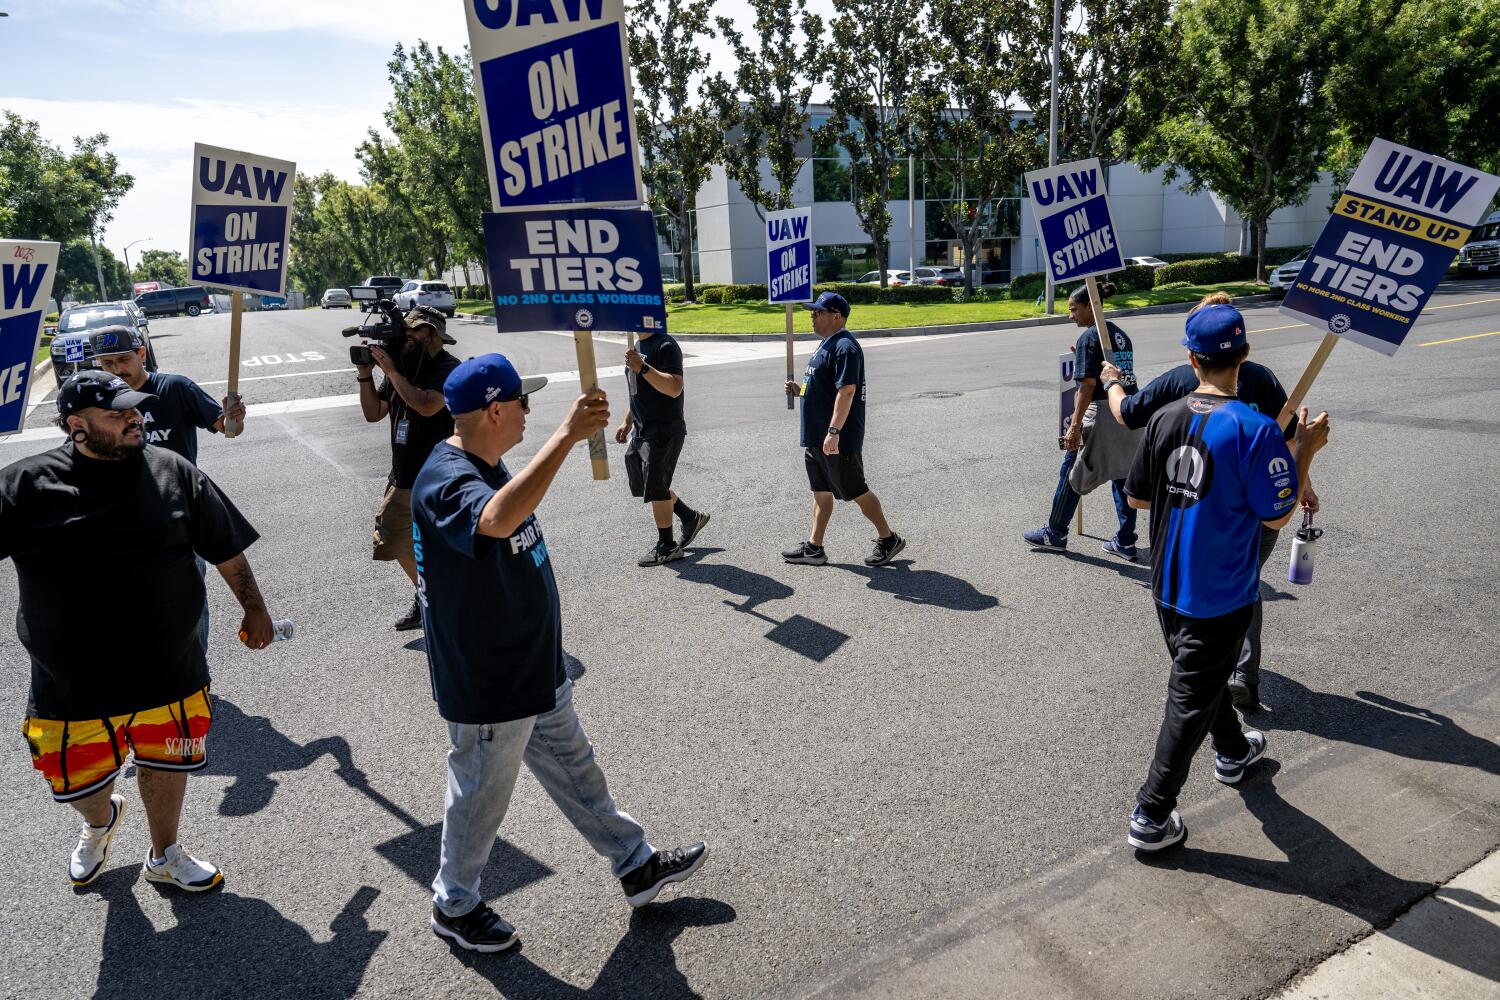 UAW aims for drivers' attention by striking parts warehouses, including two in the Inland Empire